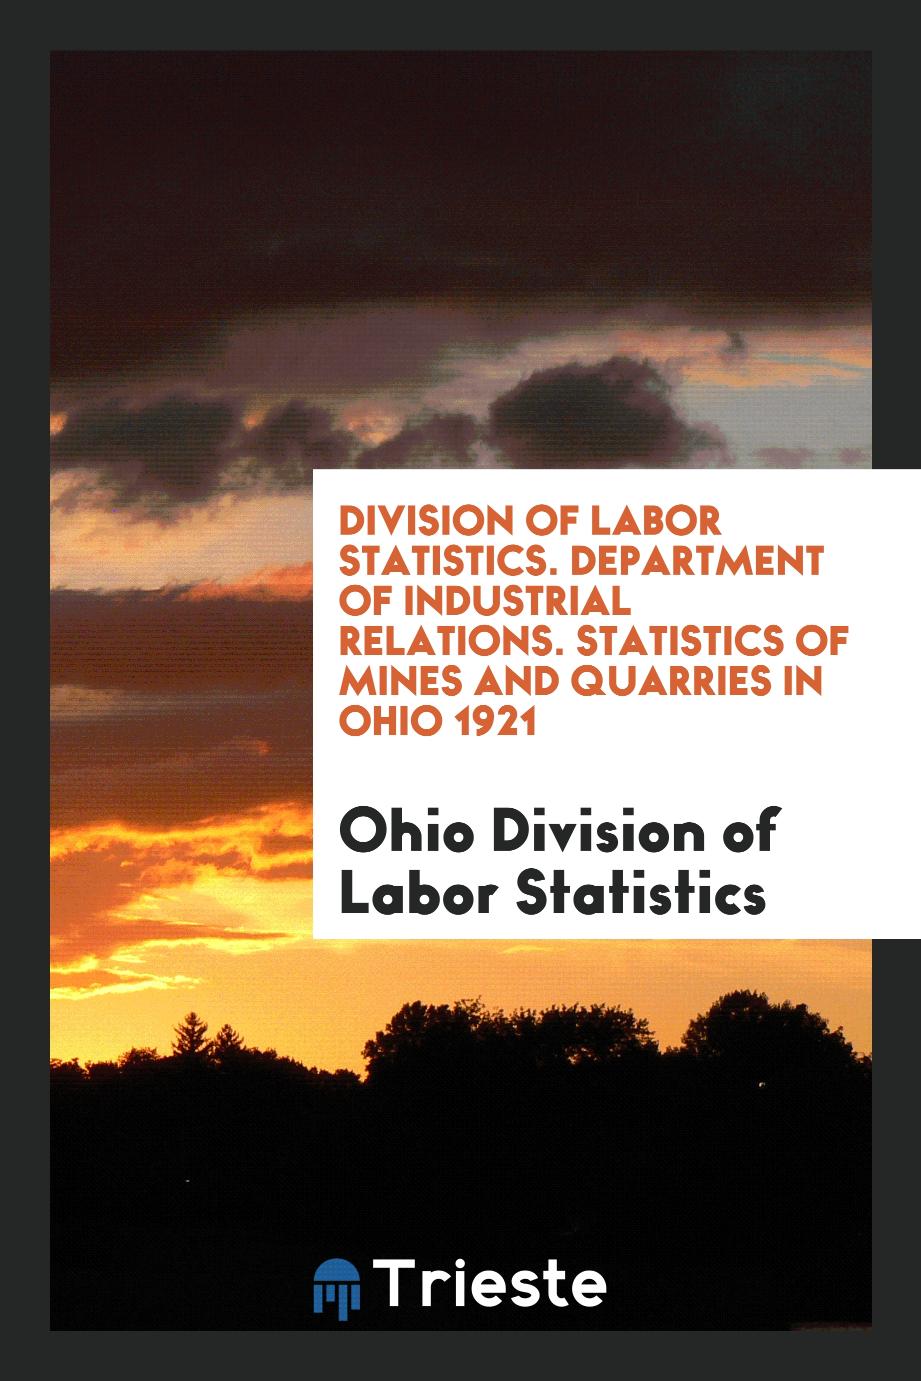 Division of Labor Statistics. Department of Industrial relations. Statistics of Mines and quarries in Ohio 1921